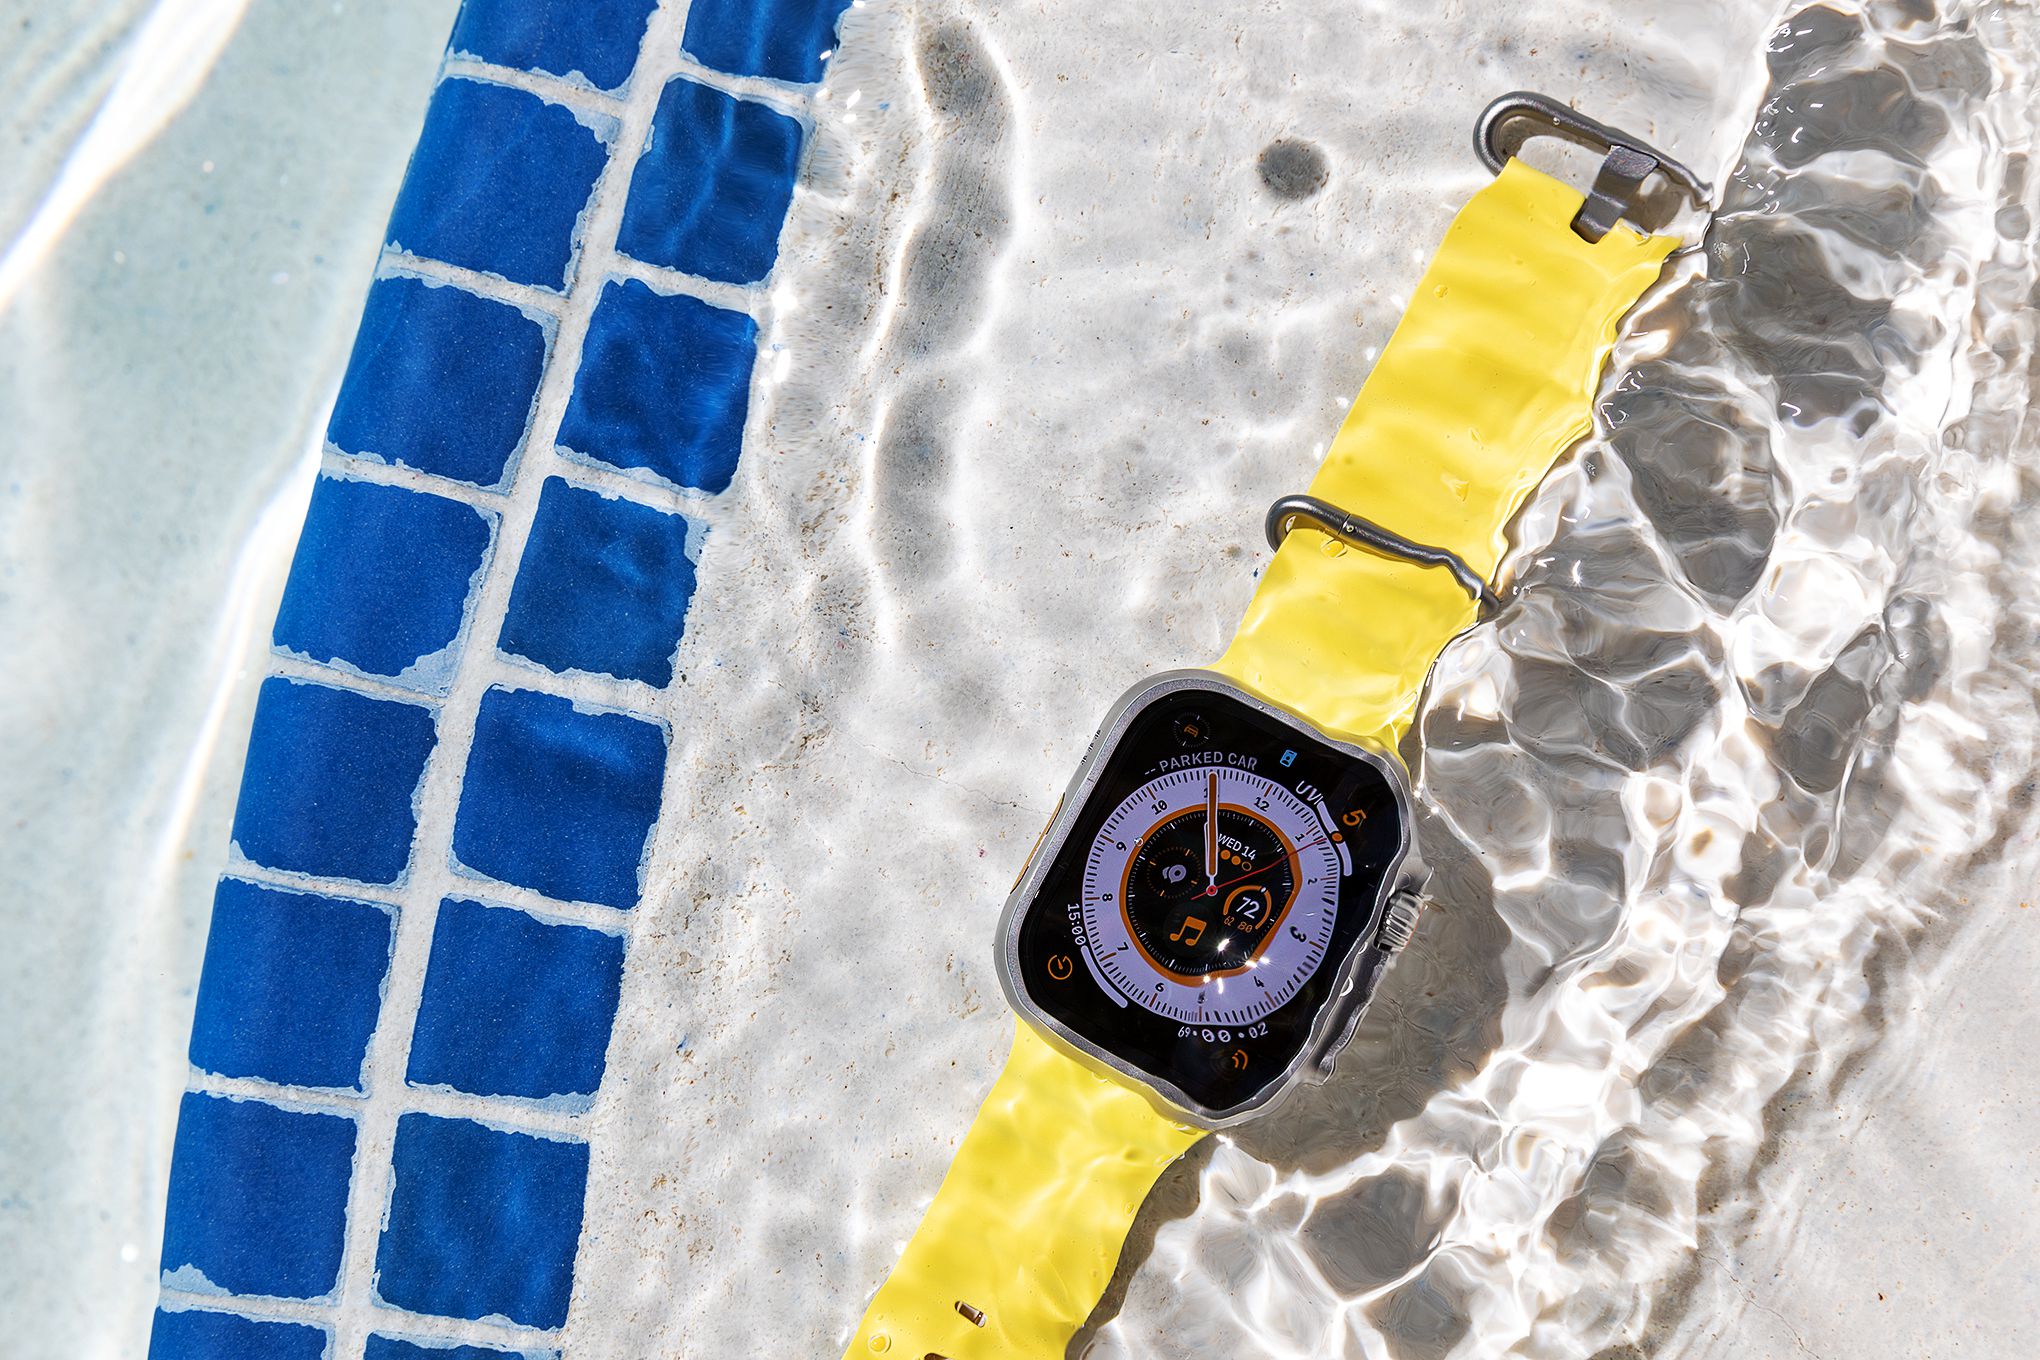 The Apple Watch Ultra under water